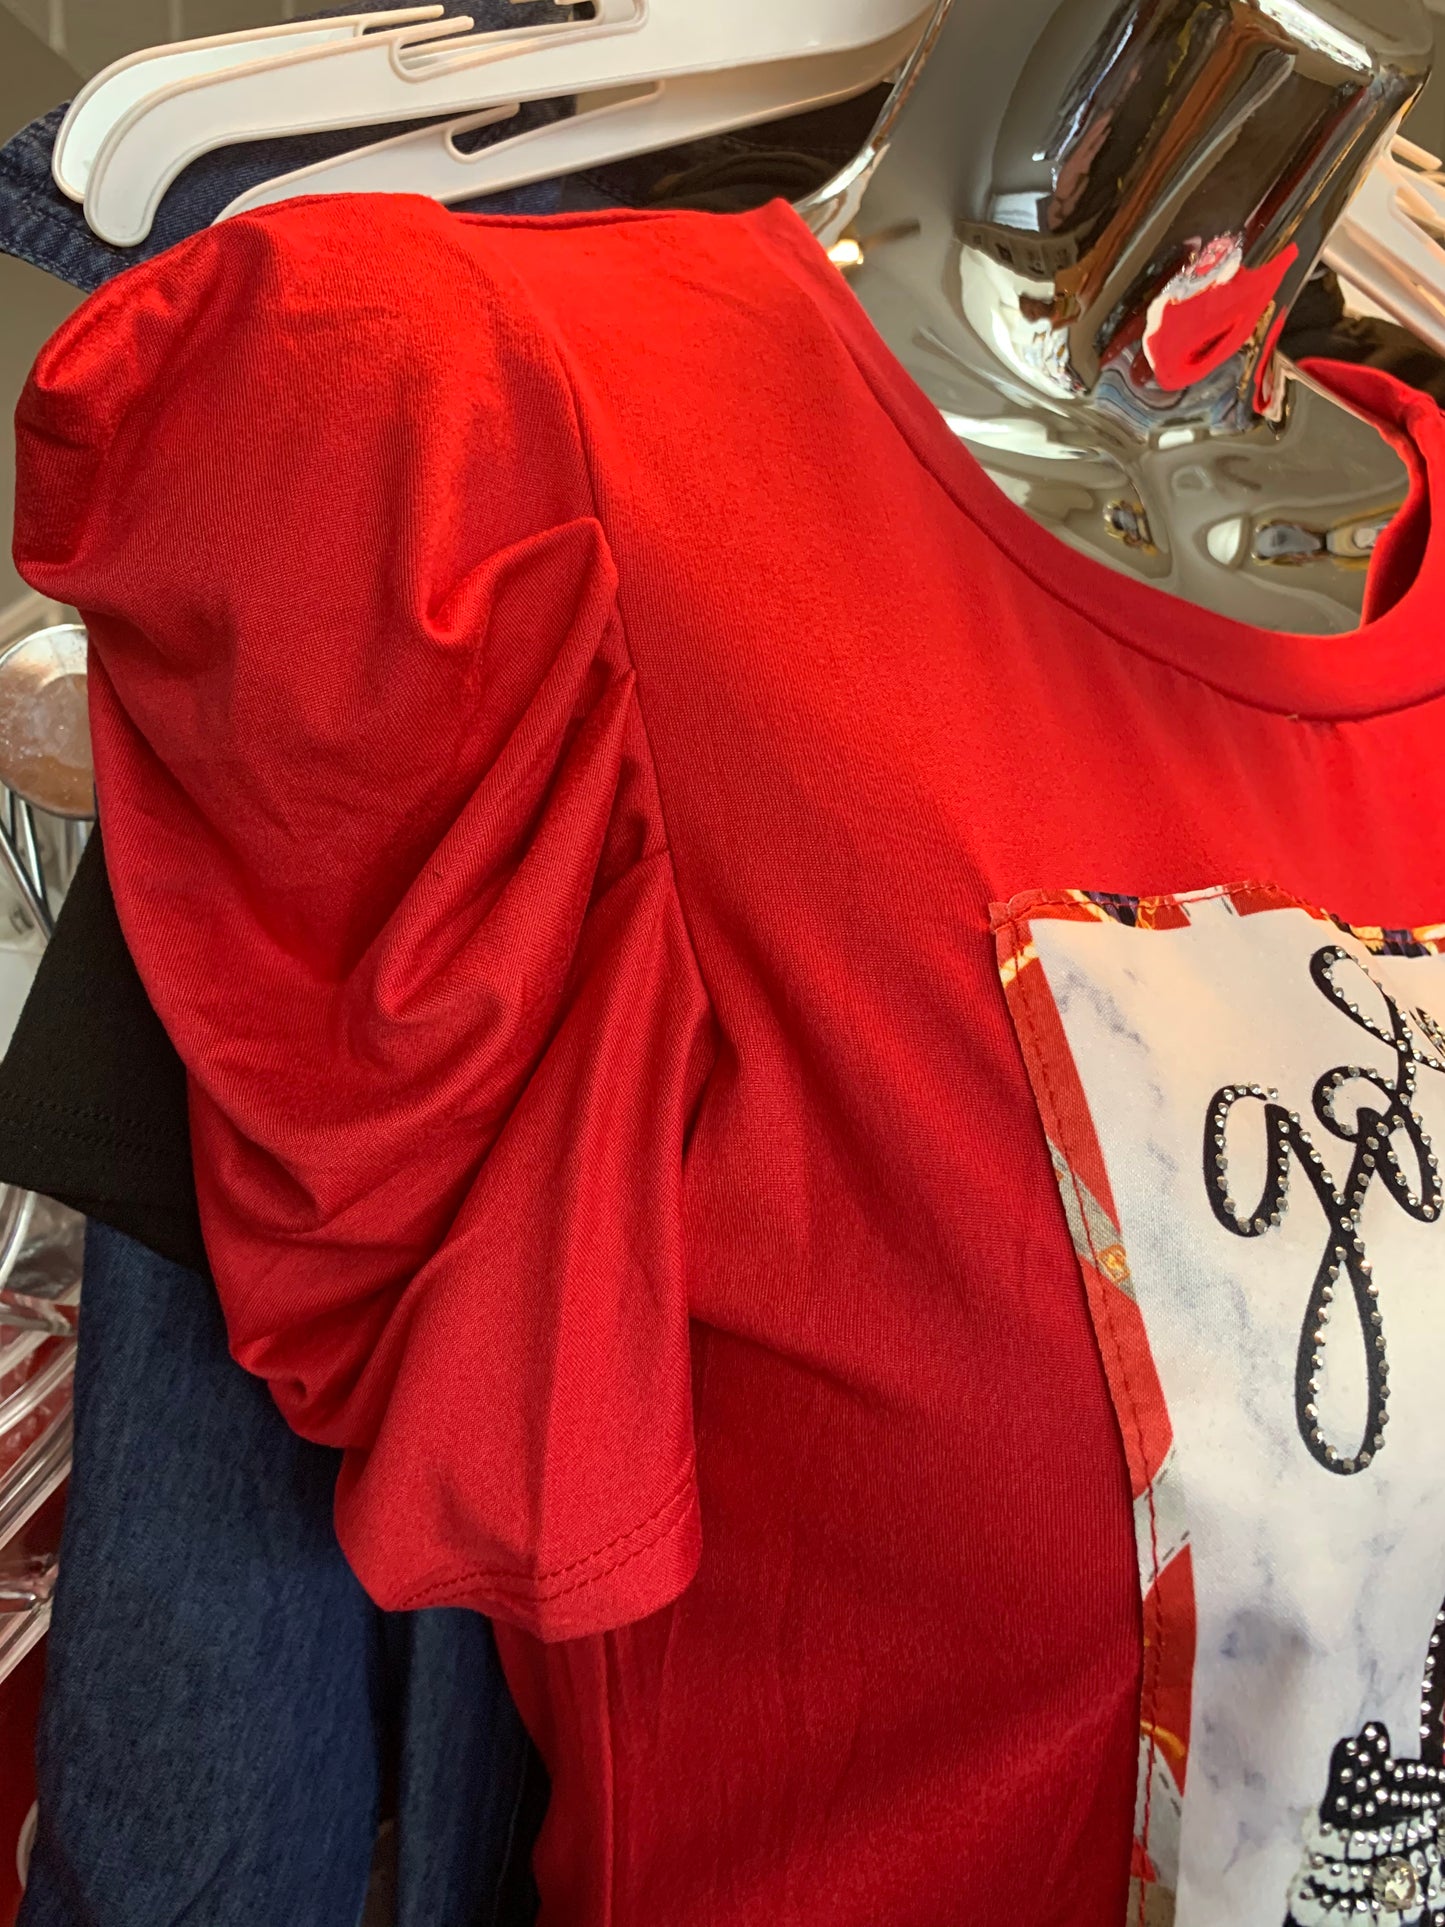 Gorgeous red bling ruffle sleeve tee